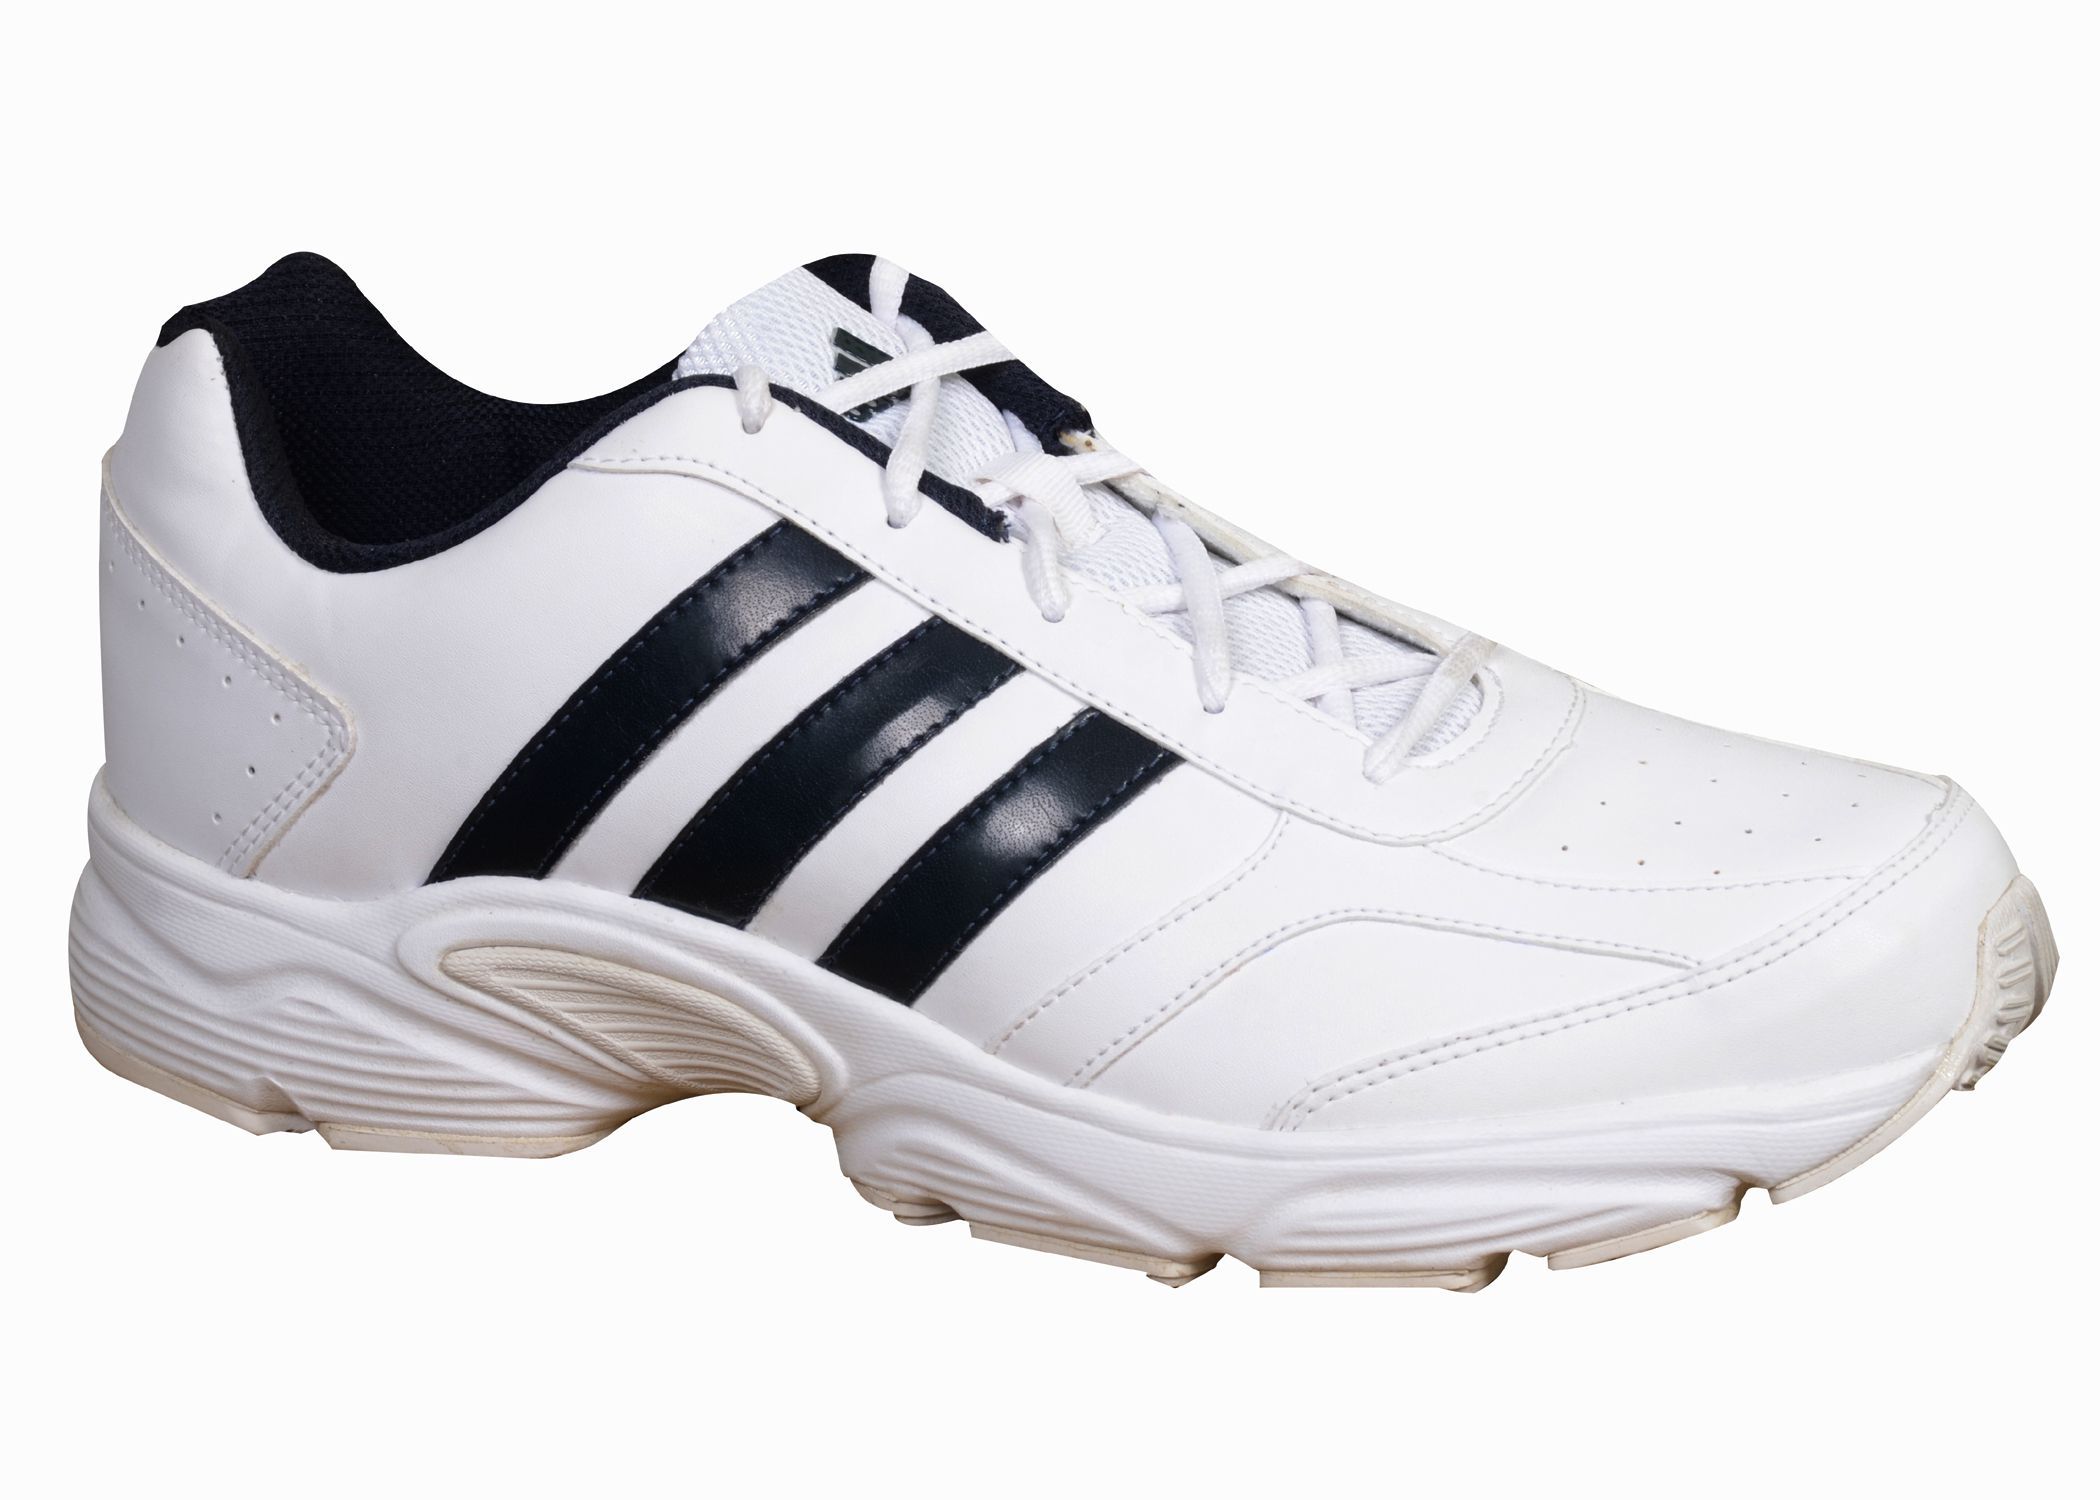 Adidas White Running Shoes - Buy Adidas White Running Shoes Online at ...